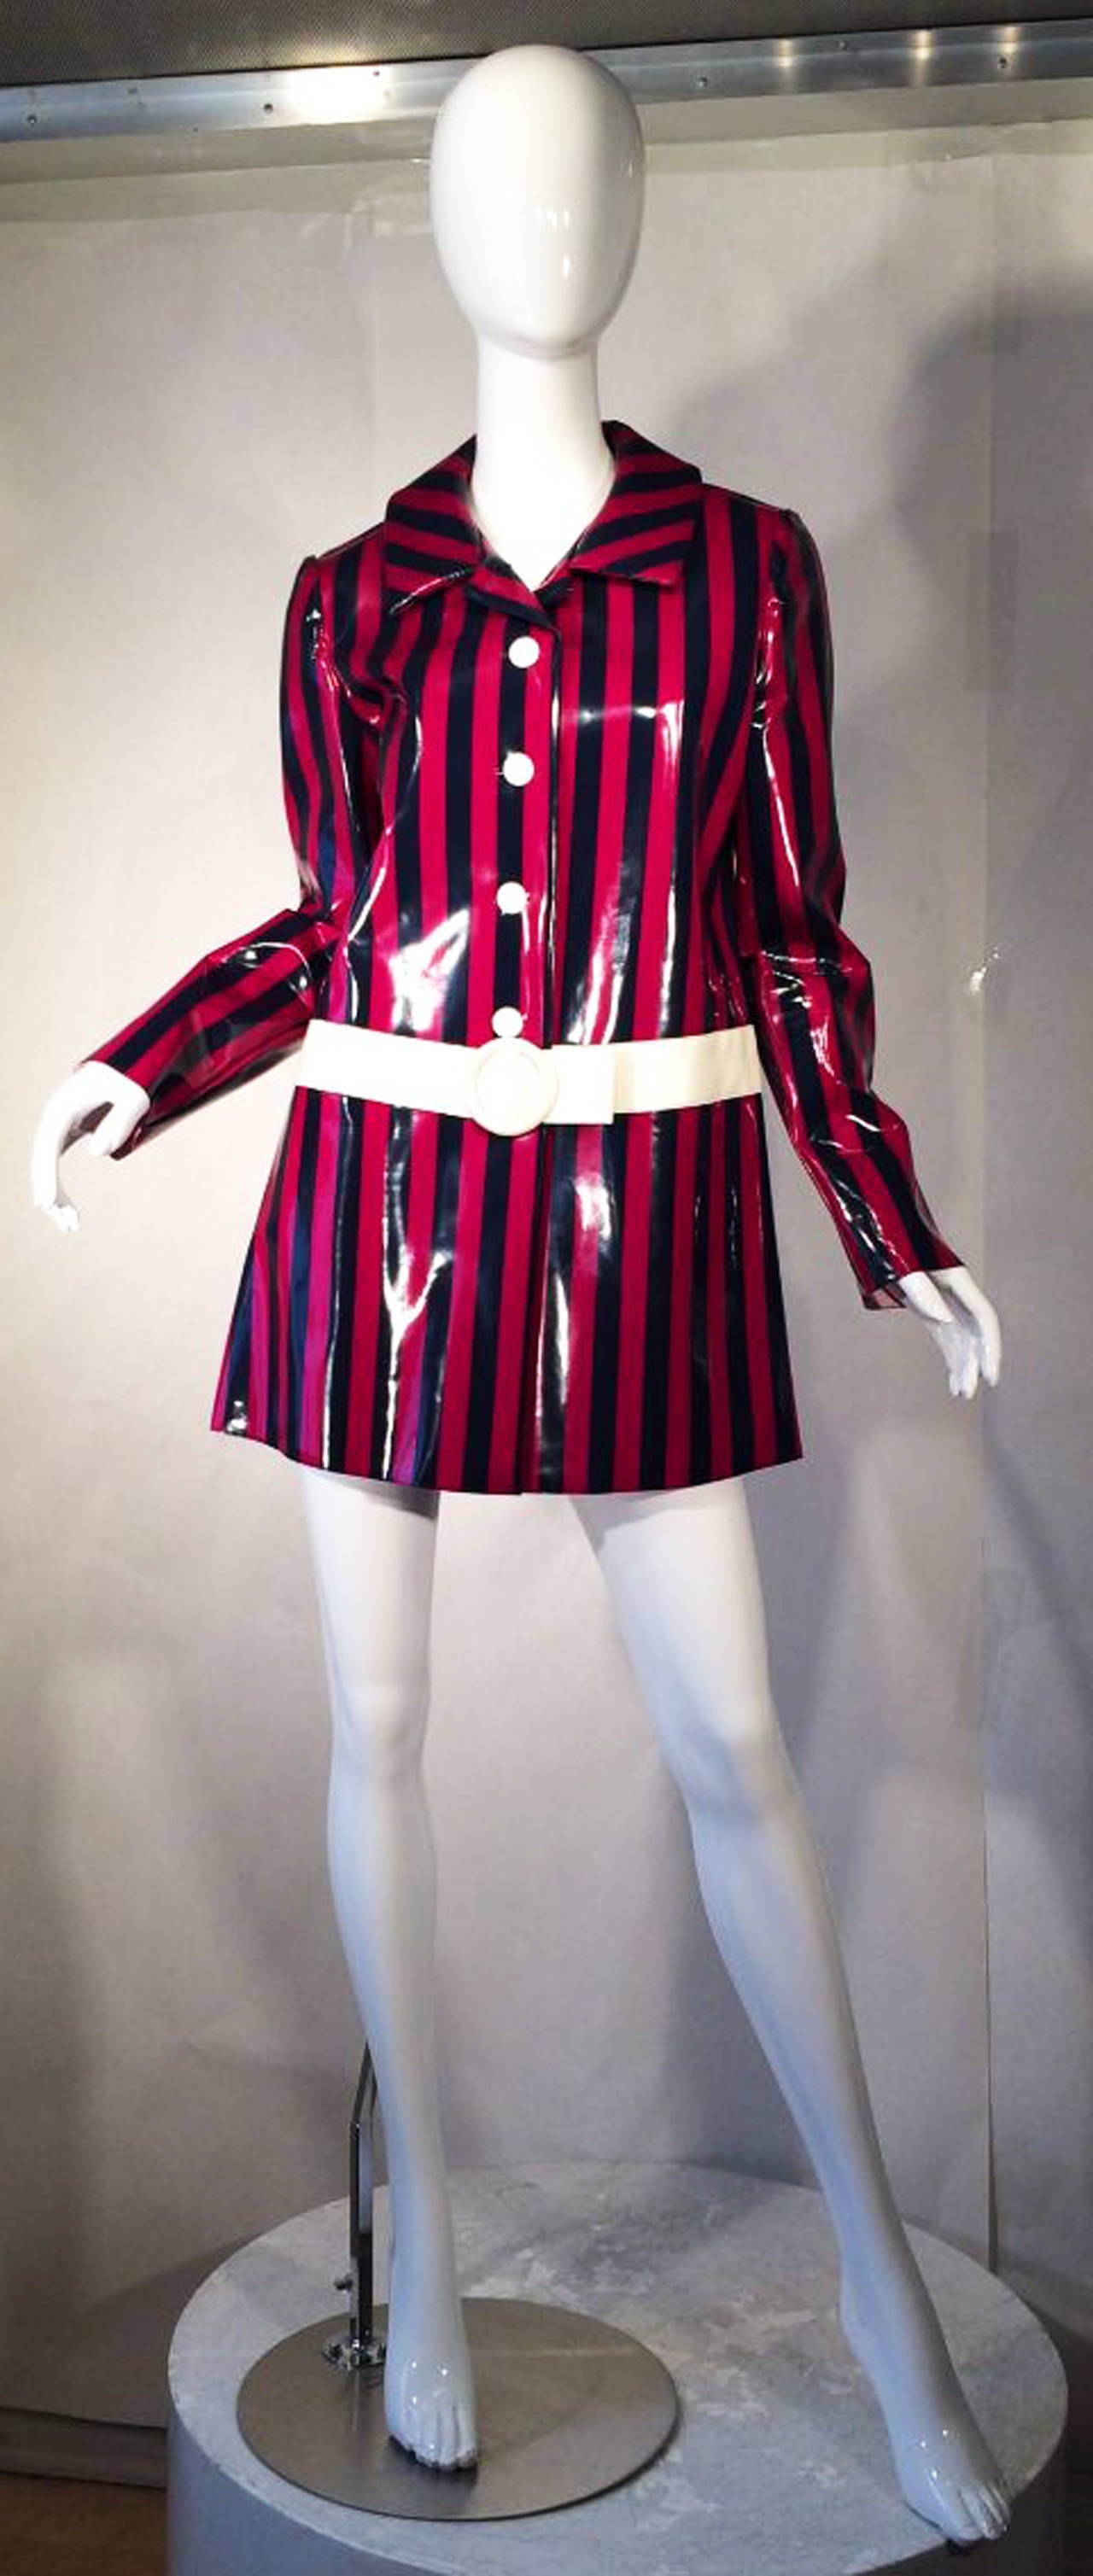 A fine vintage Mary Quant vinyl slicker rain jacket. Mod vinyl coated awning stripe item features a built in white vinyl belt and buttons. Item worn by Joan Collins for the film, These Old Broads co-starring Debbie Reynolds, Shirley Maclaine and